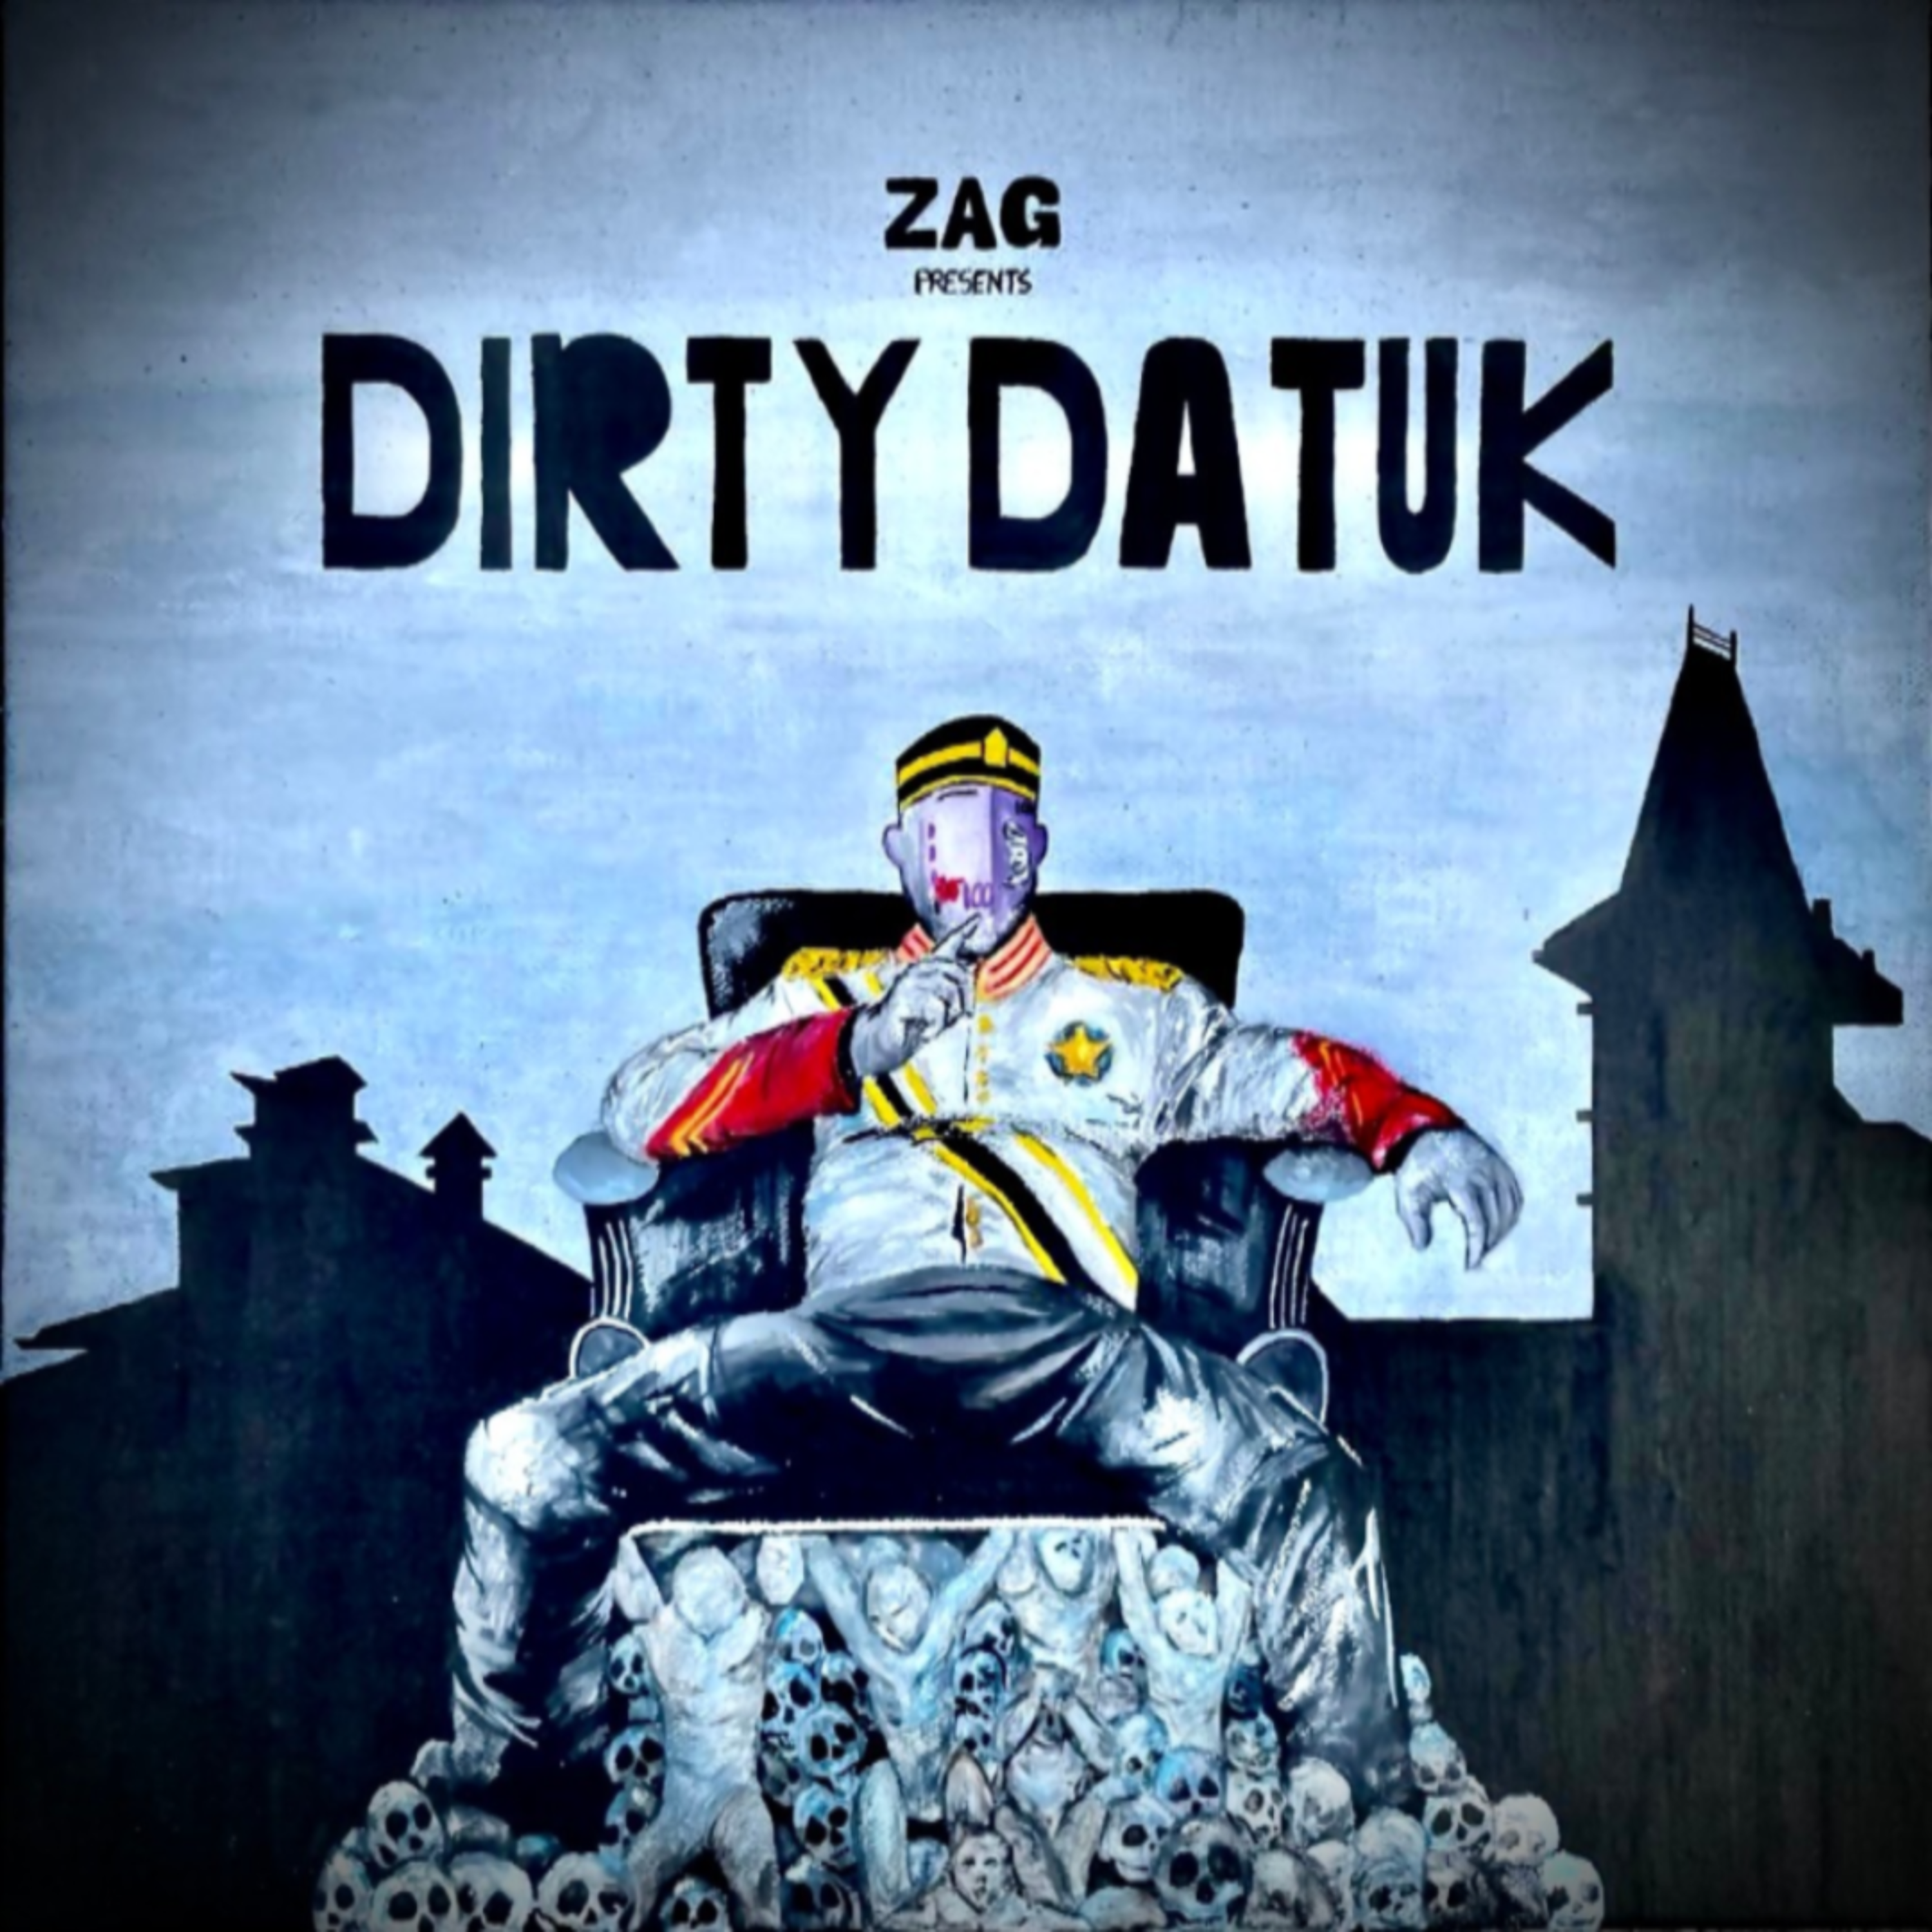 DIRTY DATUK EP7: THE GREATEST SHOW ON EARTH